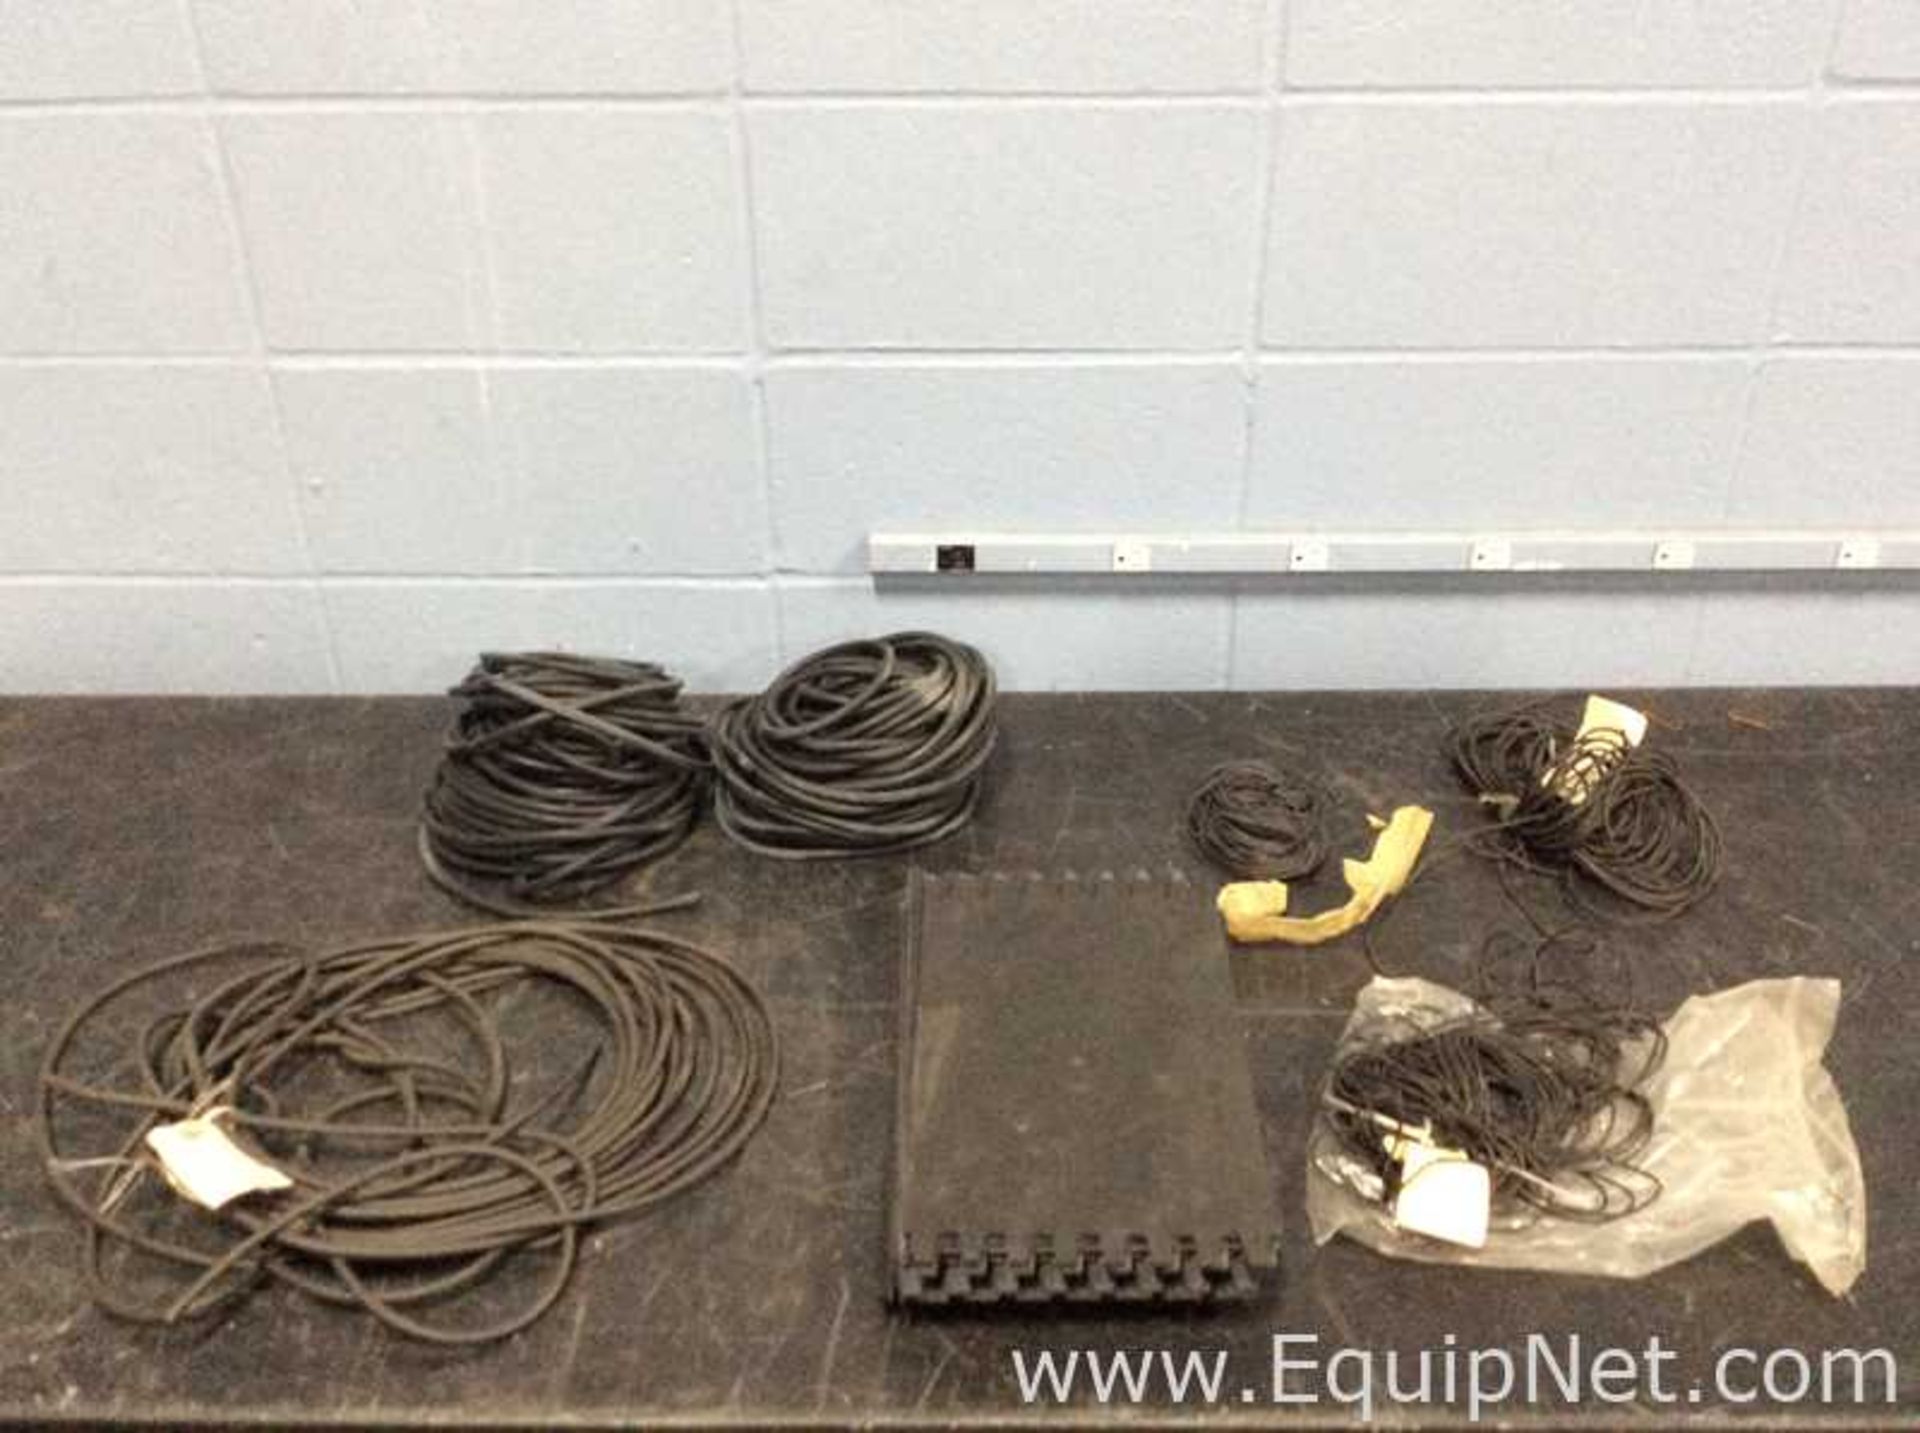 Lot of Various Sized Solid Rubber Lines and Tiles